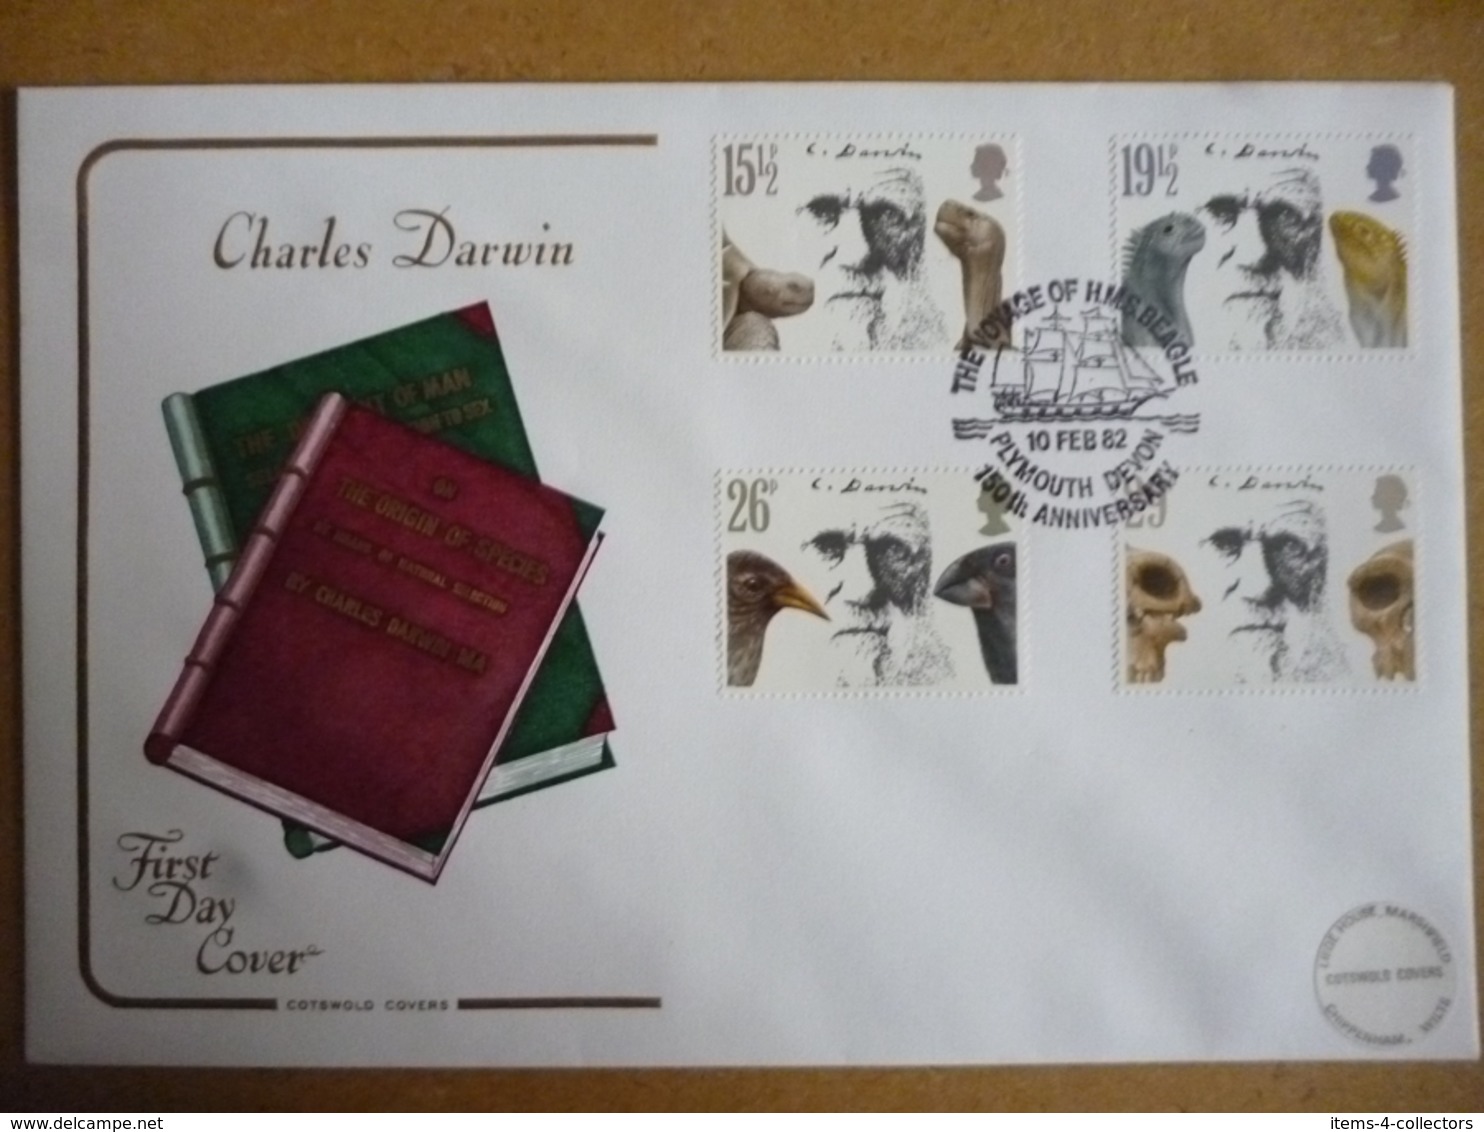 GREAT BRITAIN [UK] SG 1175 CHARLES DARWIN DEATH ANNIVERSARY (1982)  FDC SPECIAL COVER THE VOYAGE OF H.M.S.BEAGLE - 1971-1980 Decimal Issues